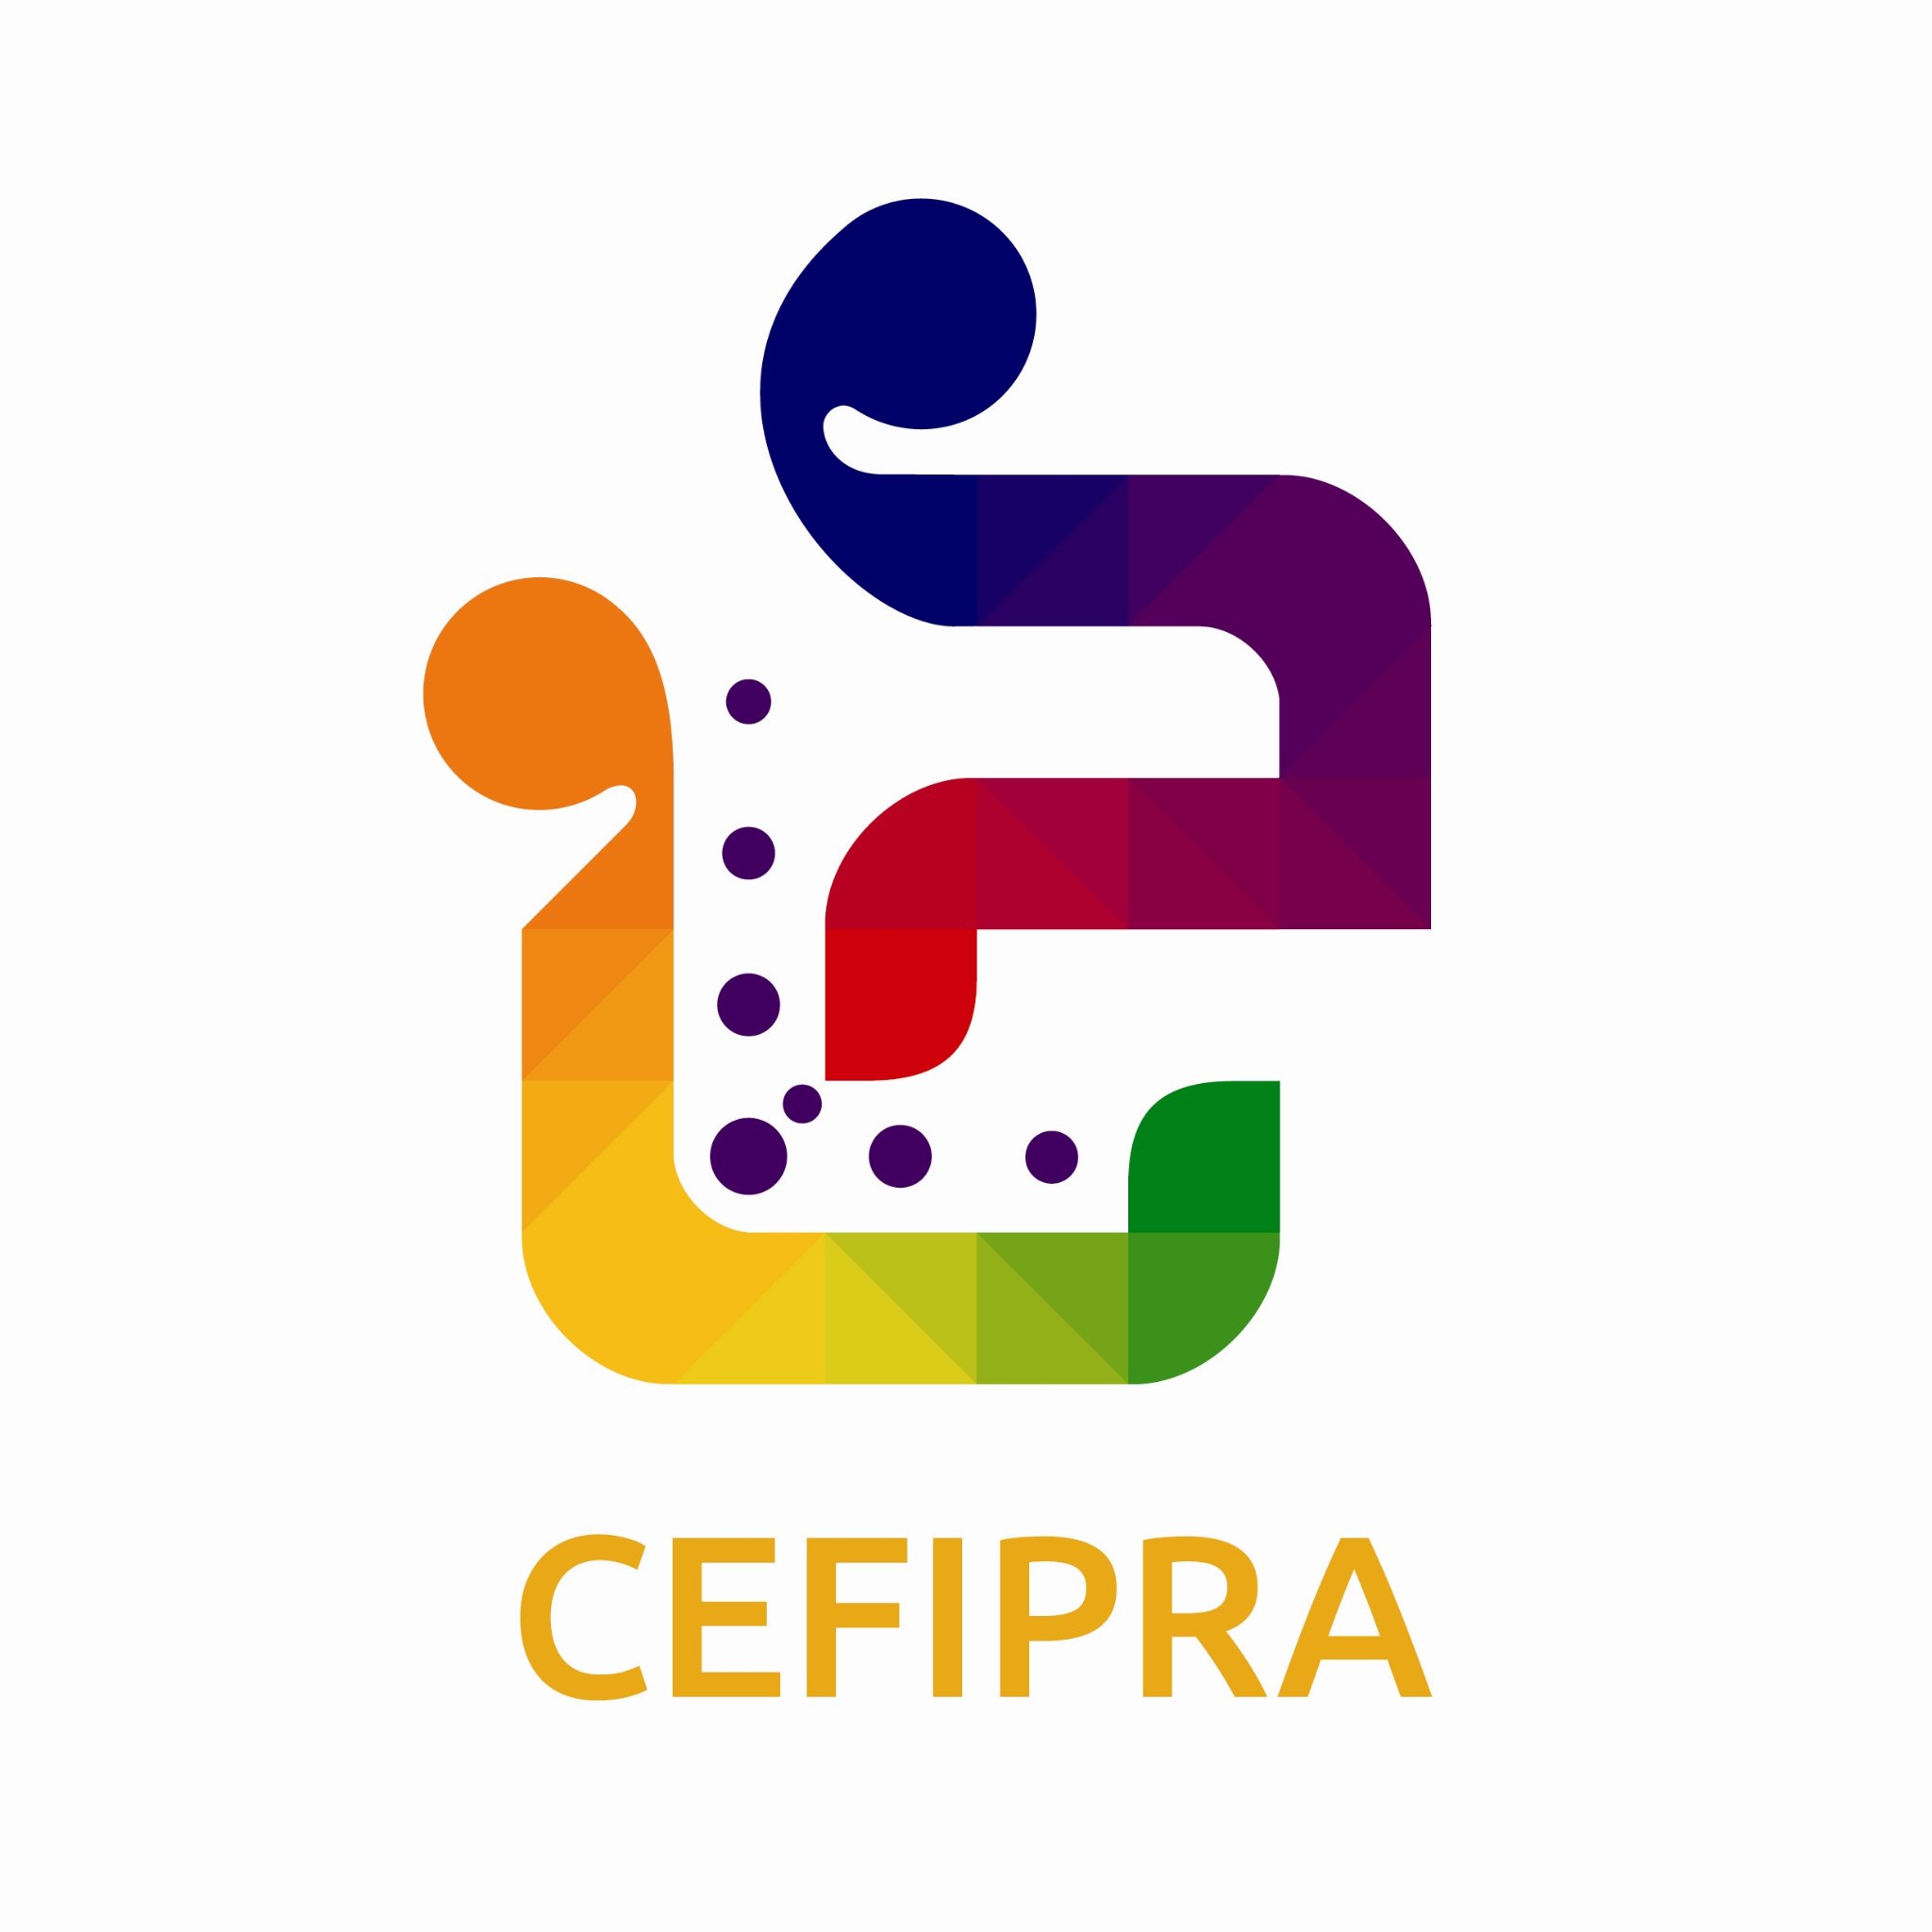 We use Twitter for broadcast only; for response to any queries, please contact - contact.ifcpar@cefipra.org